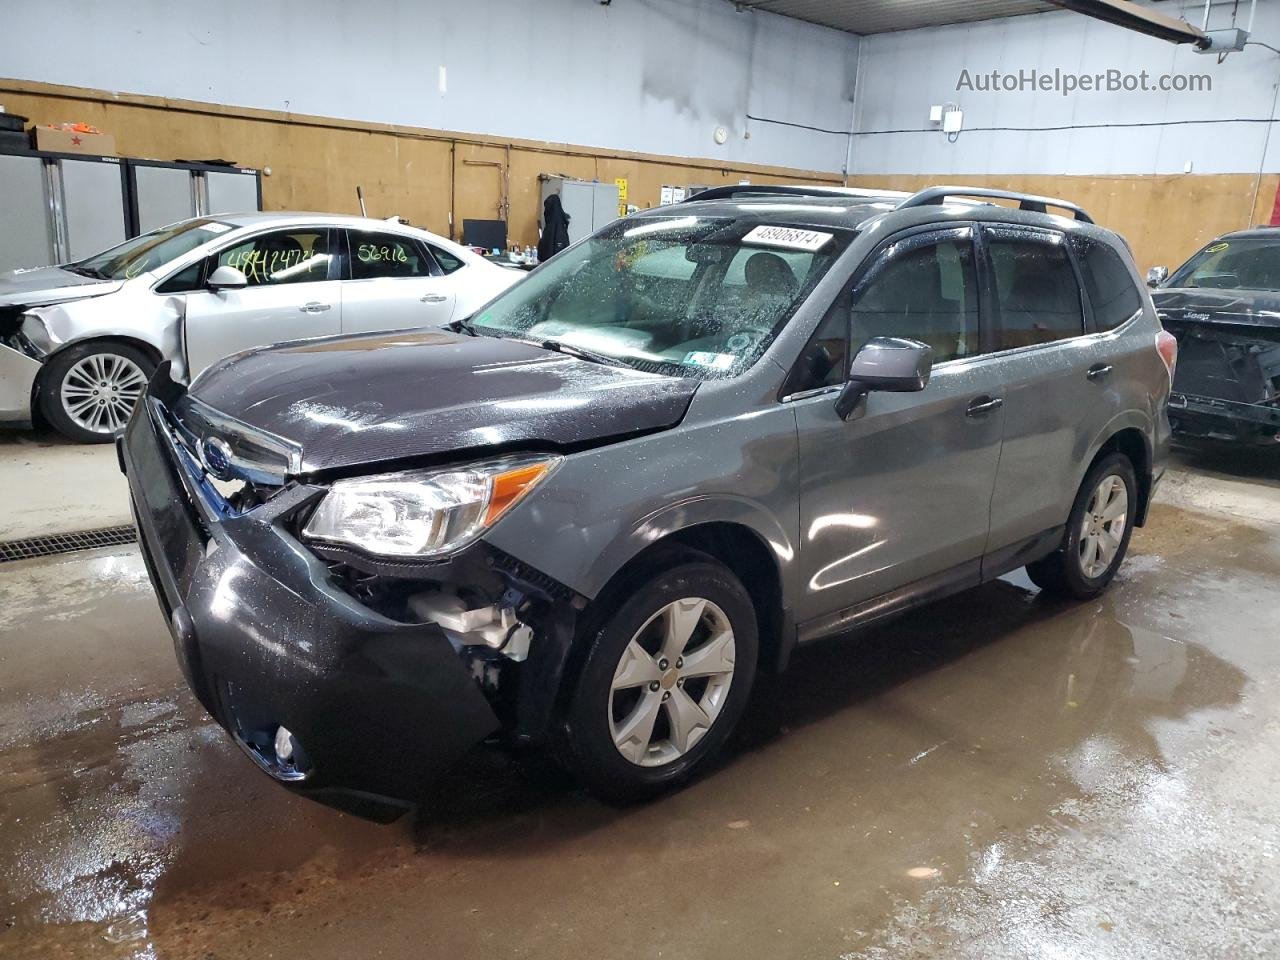 2016 Subaru Forester 2.5i Limited Серый vin: JF2SJAHC7GH409703